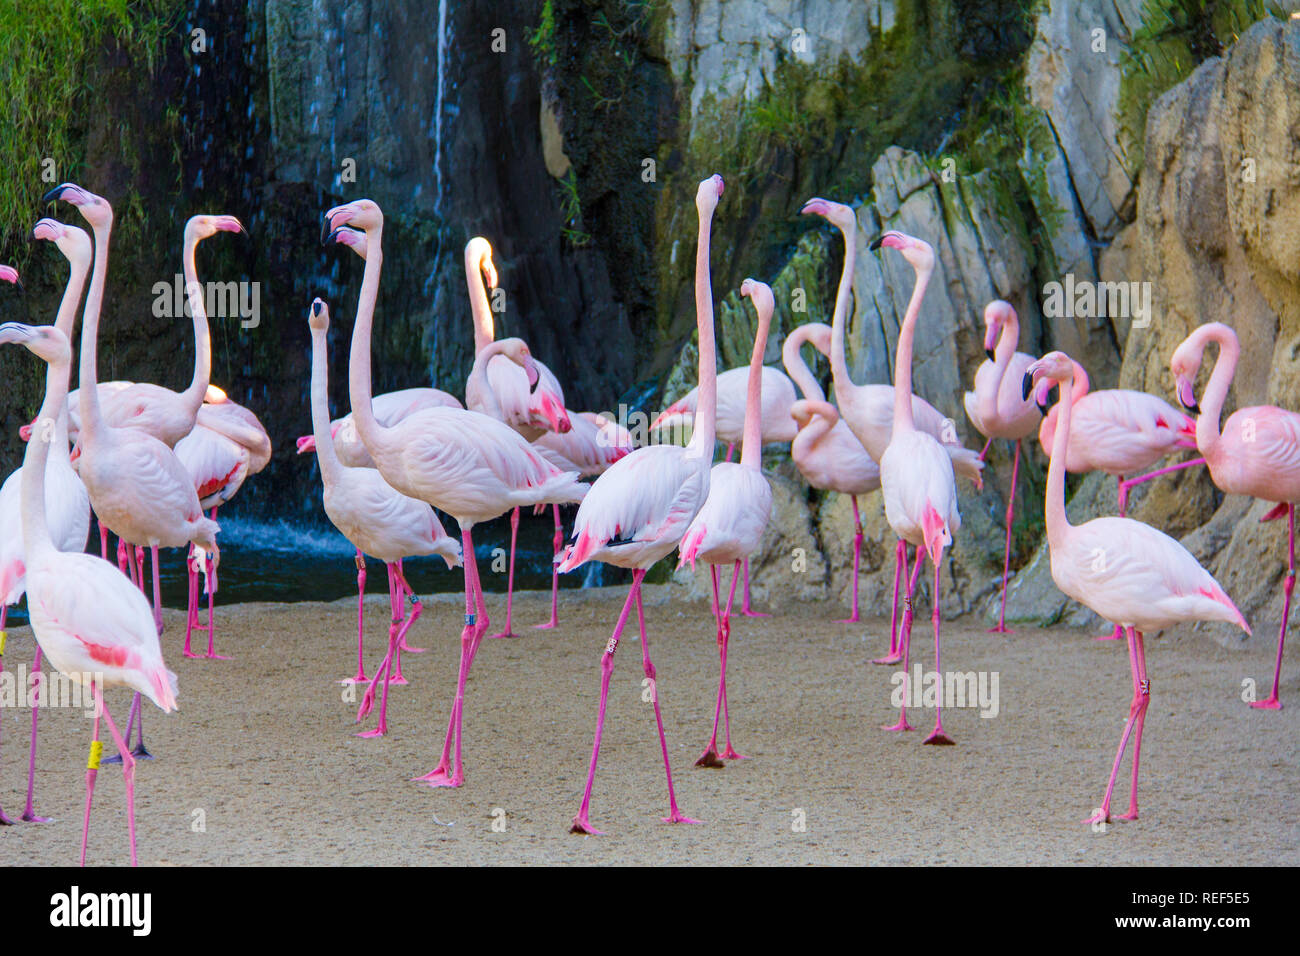 A flock of pink flamingos (Phoenicopterus) in a zoo, at Bioparc, Valencia, Spain Stock Photo